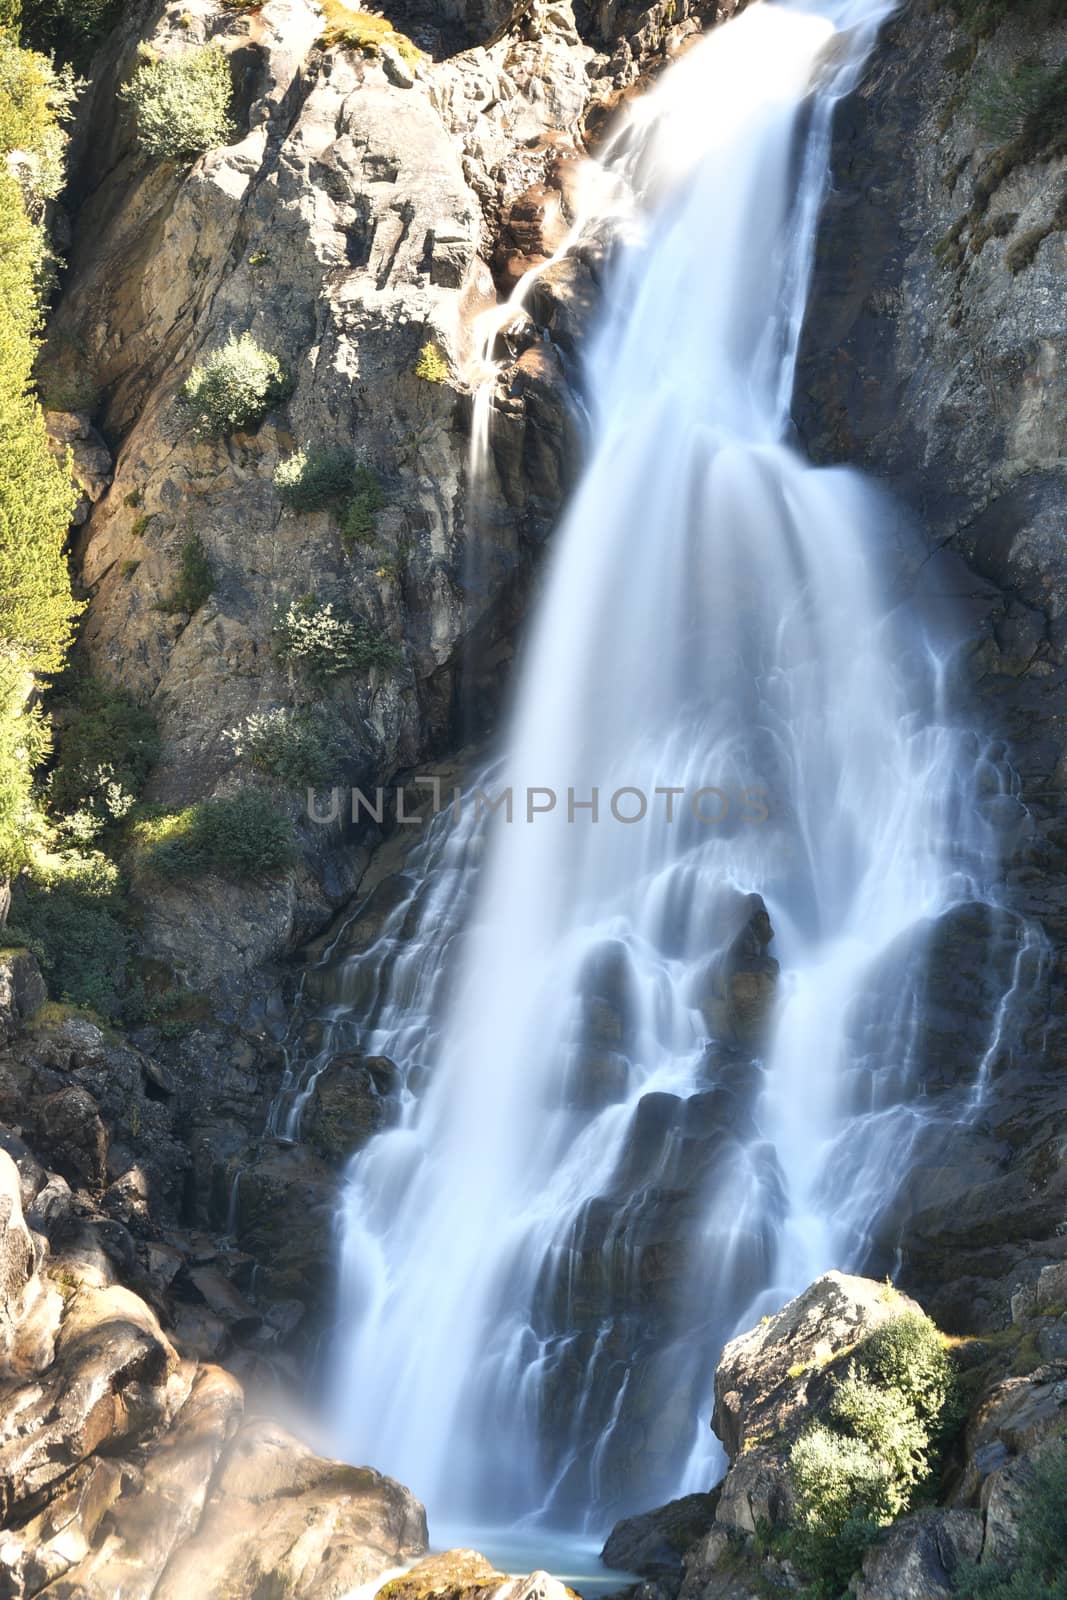 The Rutor waterfall, in Valle d'Aosta, descends impetuously among the rocks